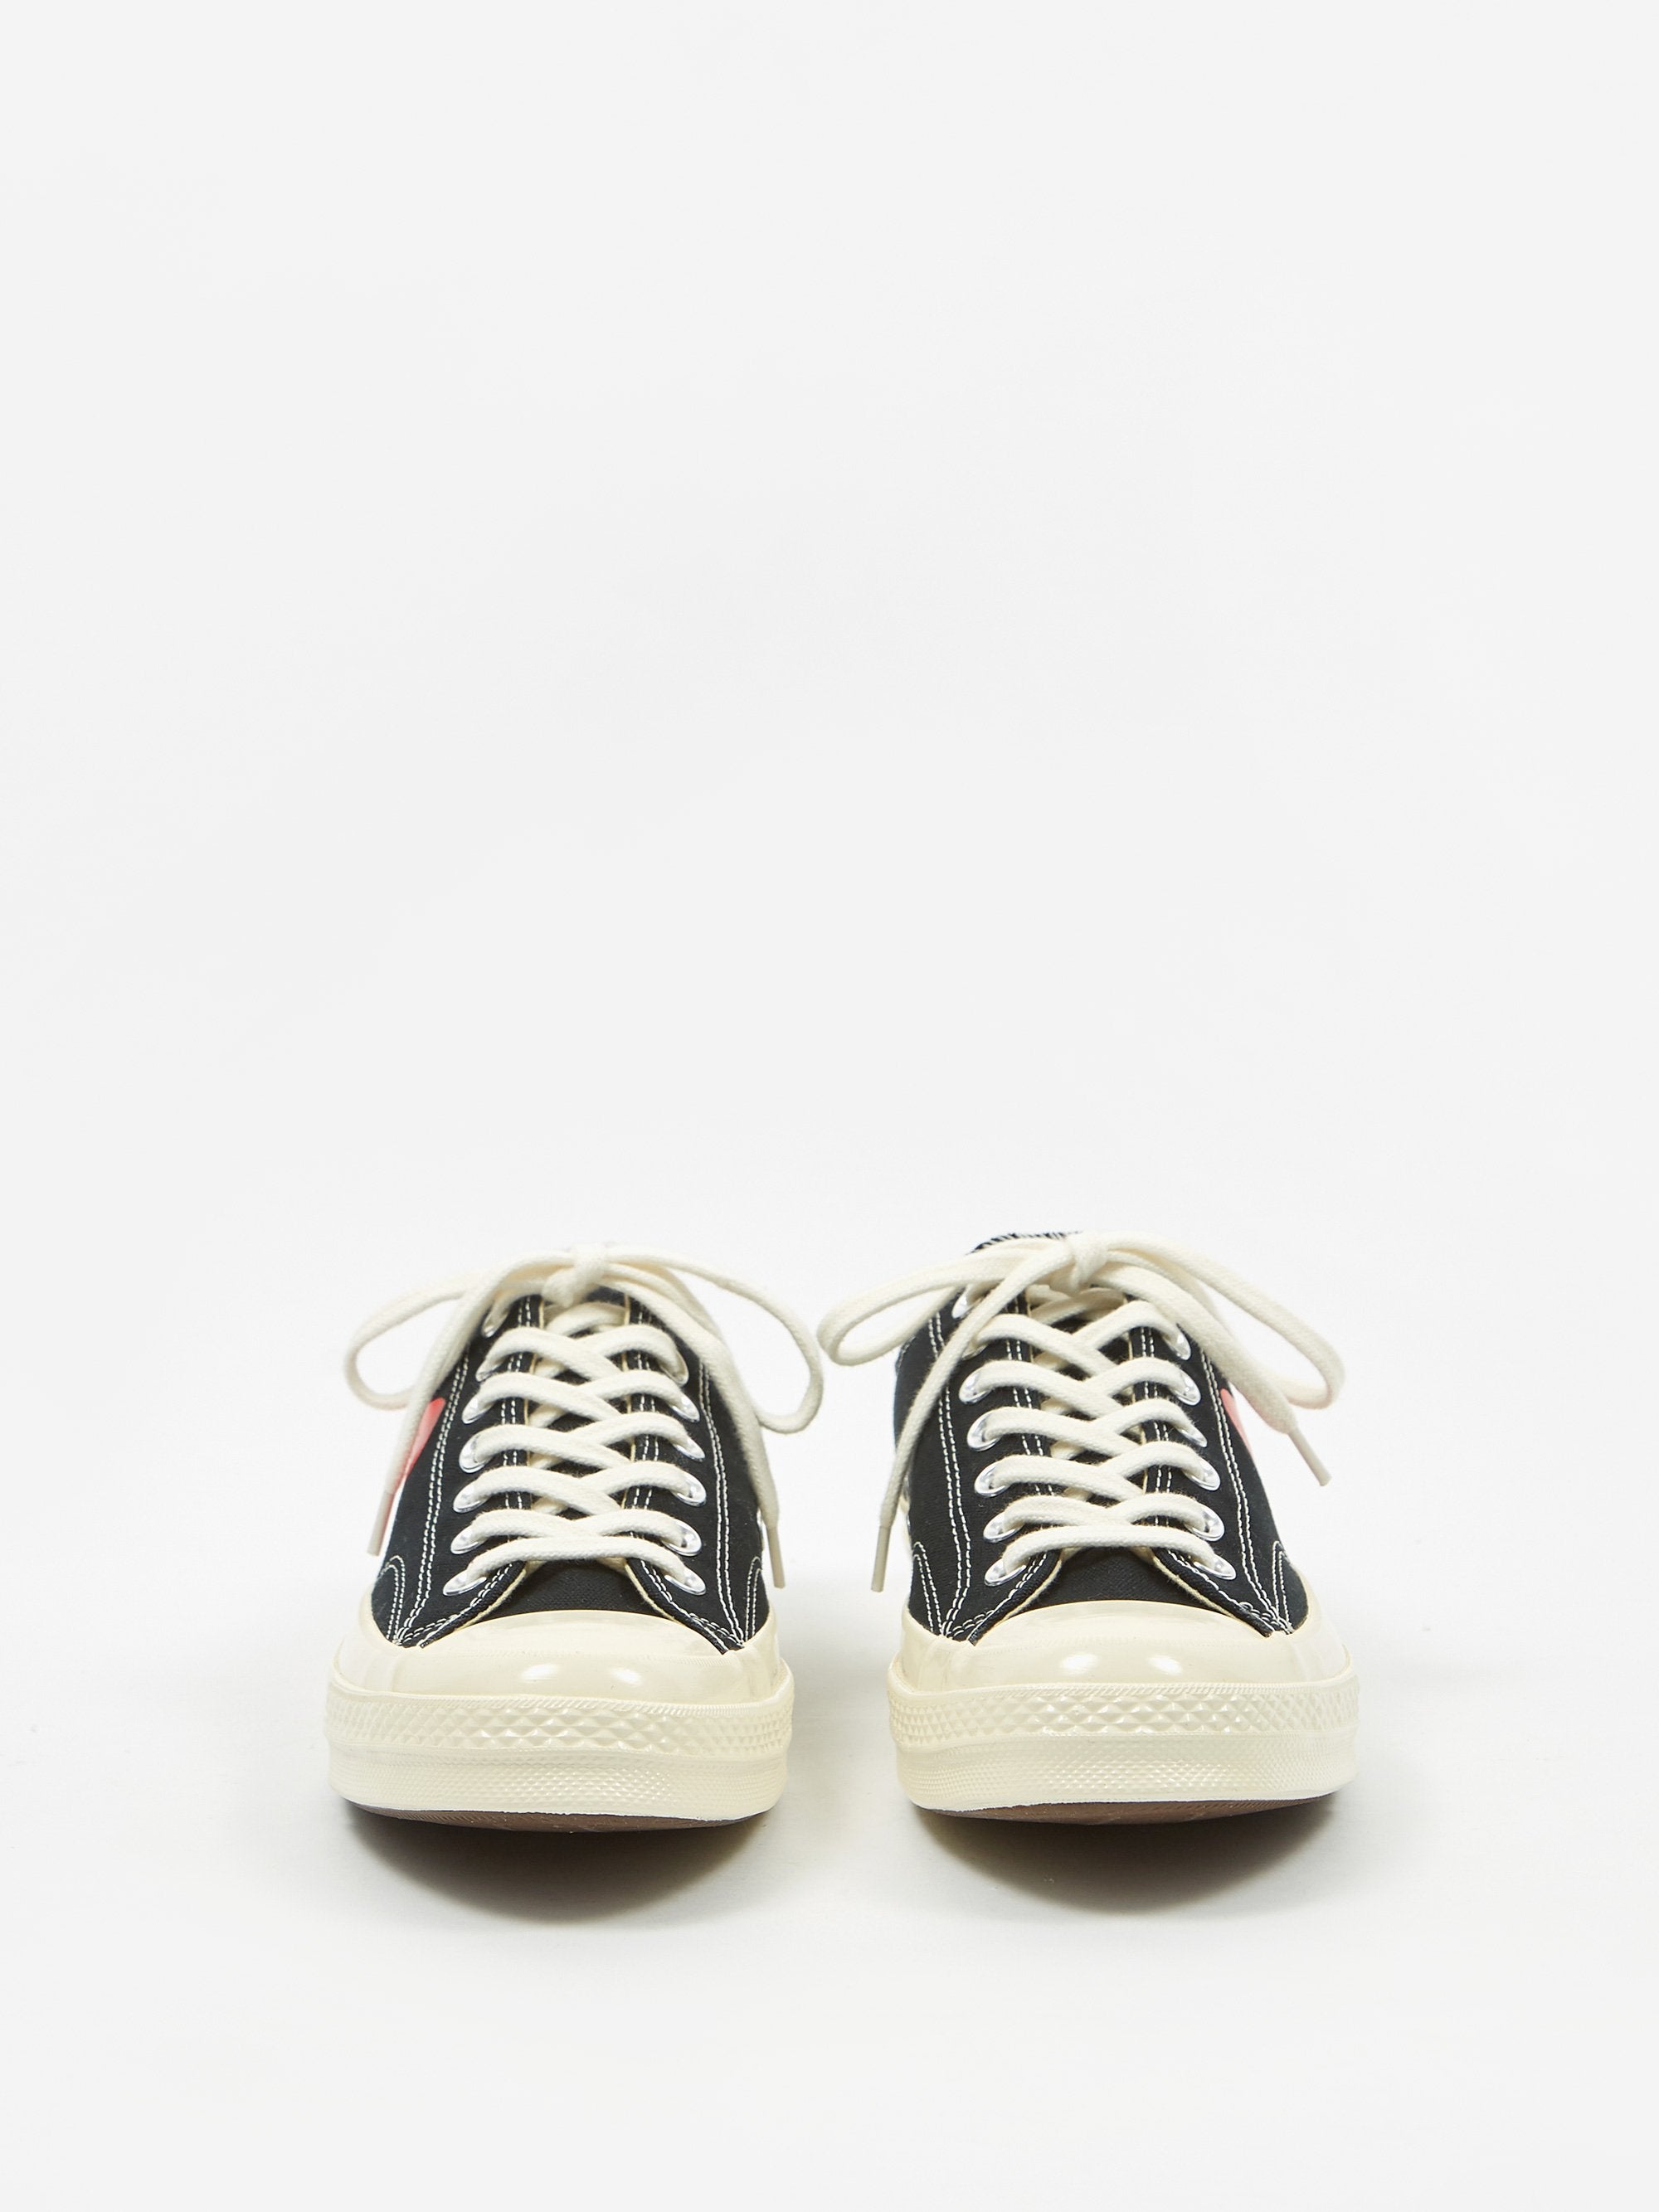 Comme des Garcons Play x Chuck Taylor All Star 70 Ox - Black | Goodhood